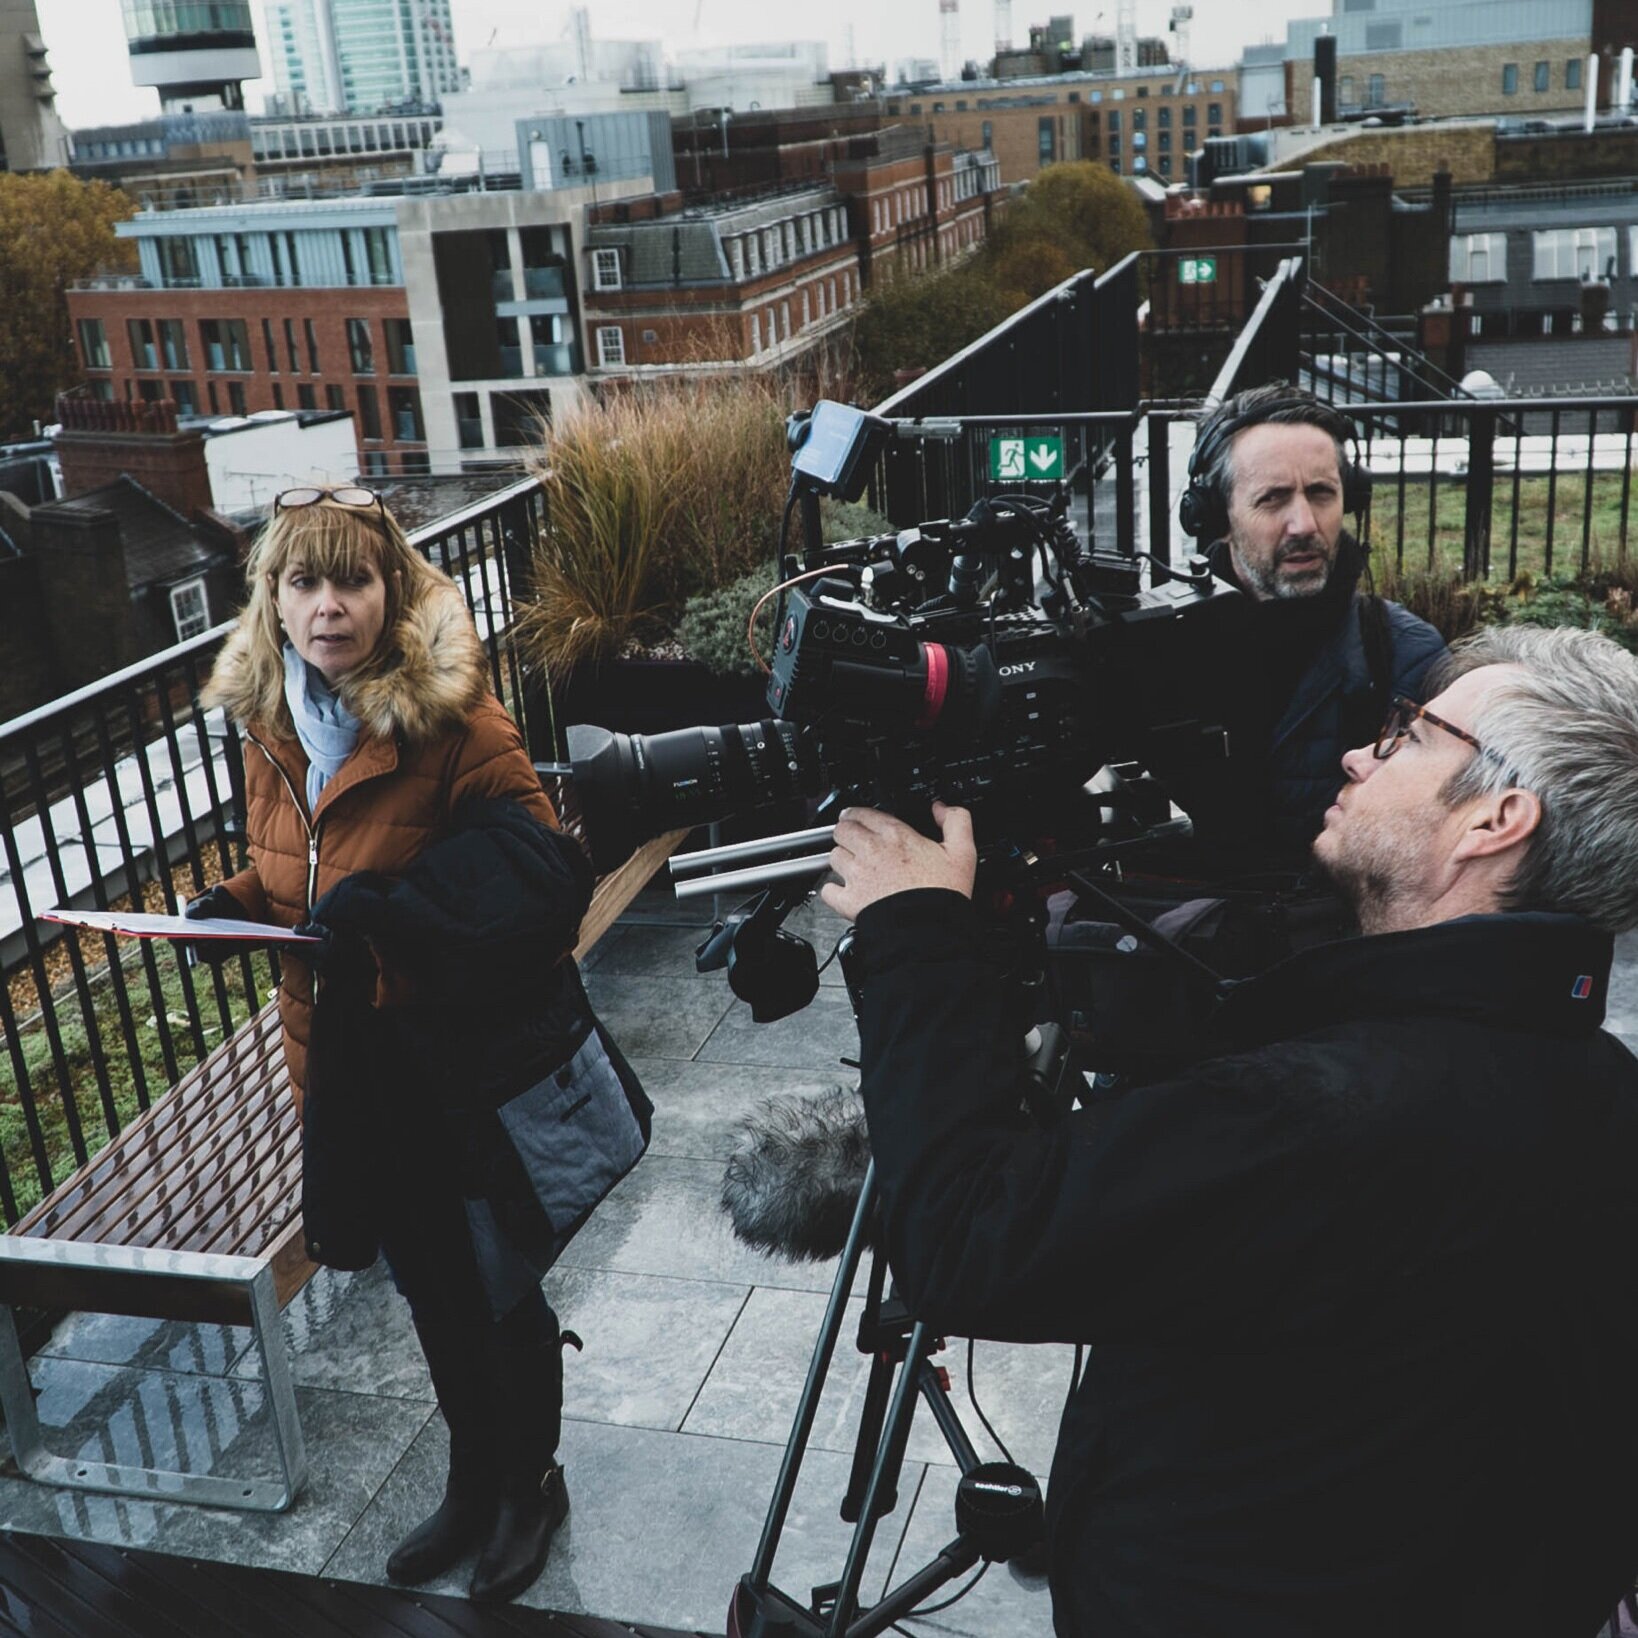 Sally+on+roof+with+crew.jpg